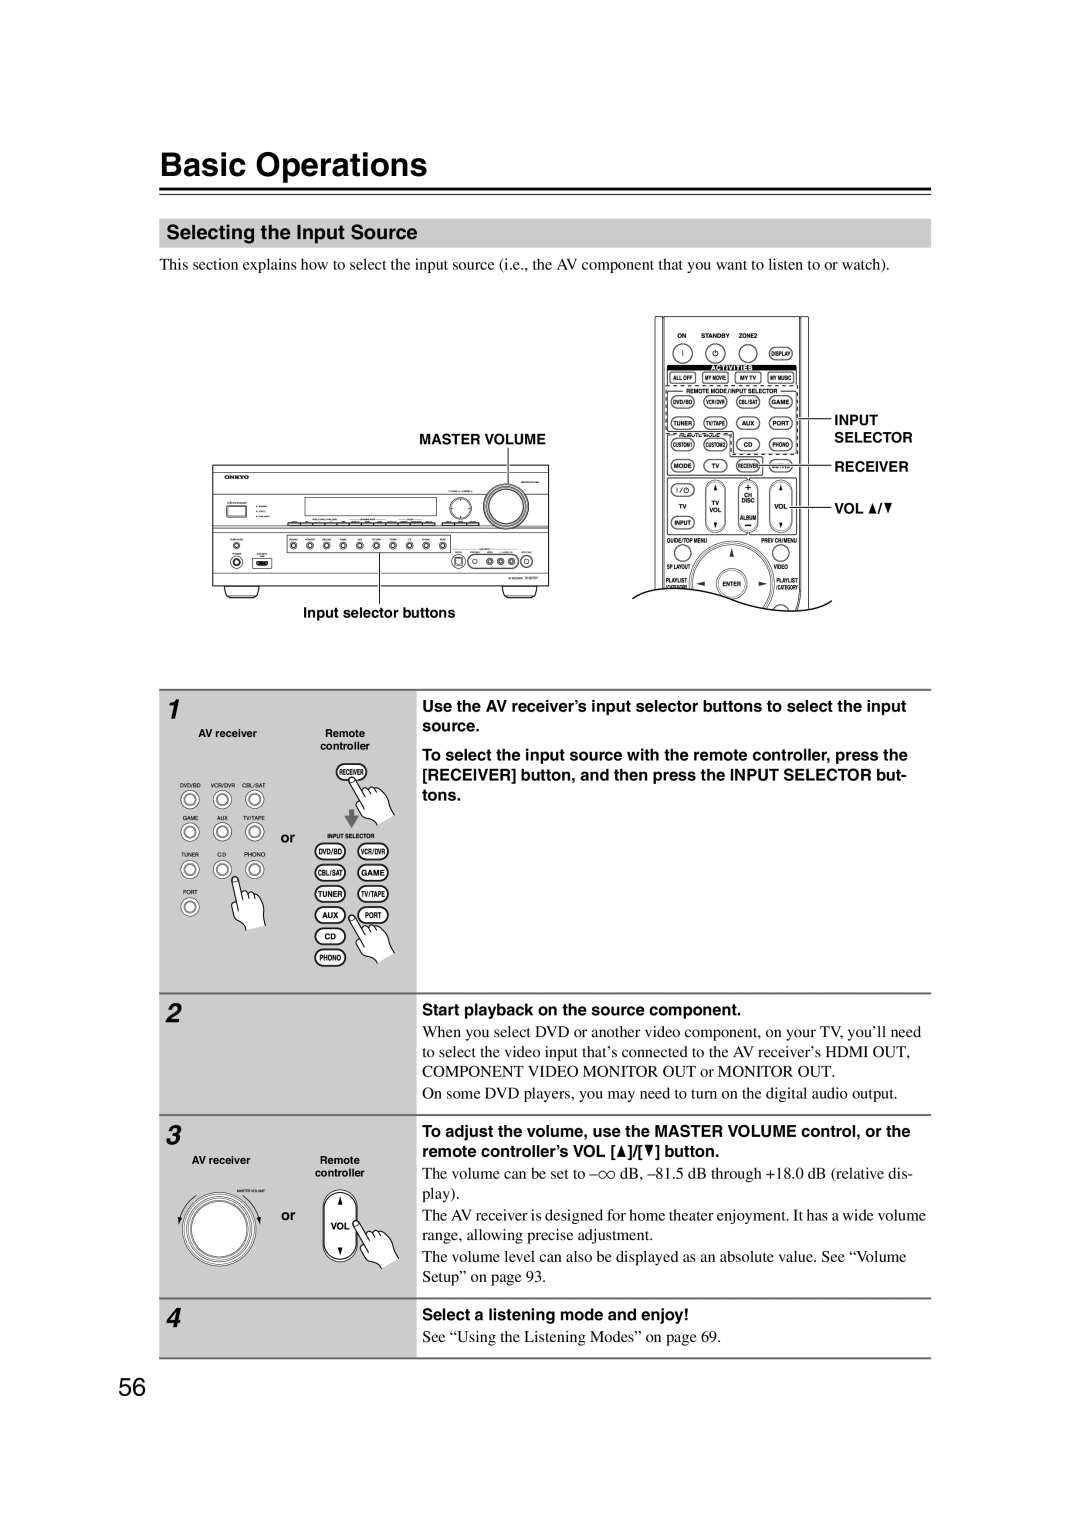 Onkyo TX-SR707 instruction manual Basic Operations, Selecting the Input Source 